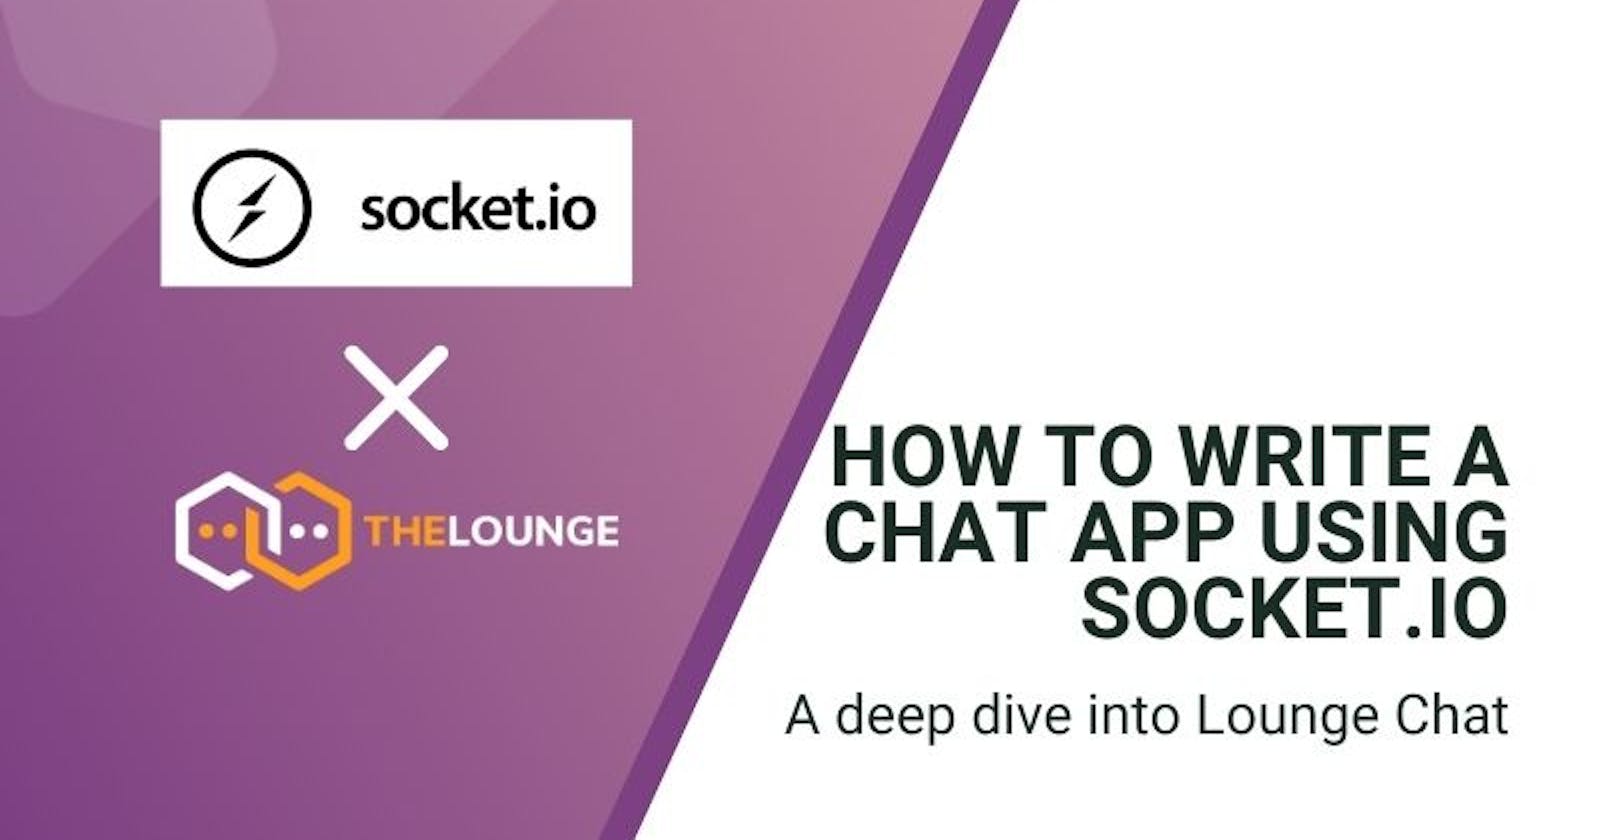 How to write a chat app using Socket.io: A deep dive into Lounge Chat